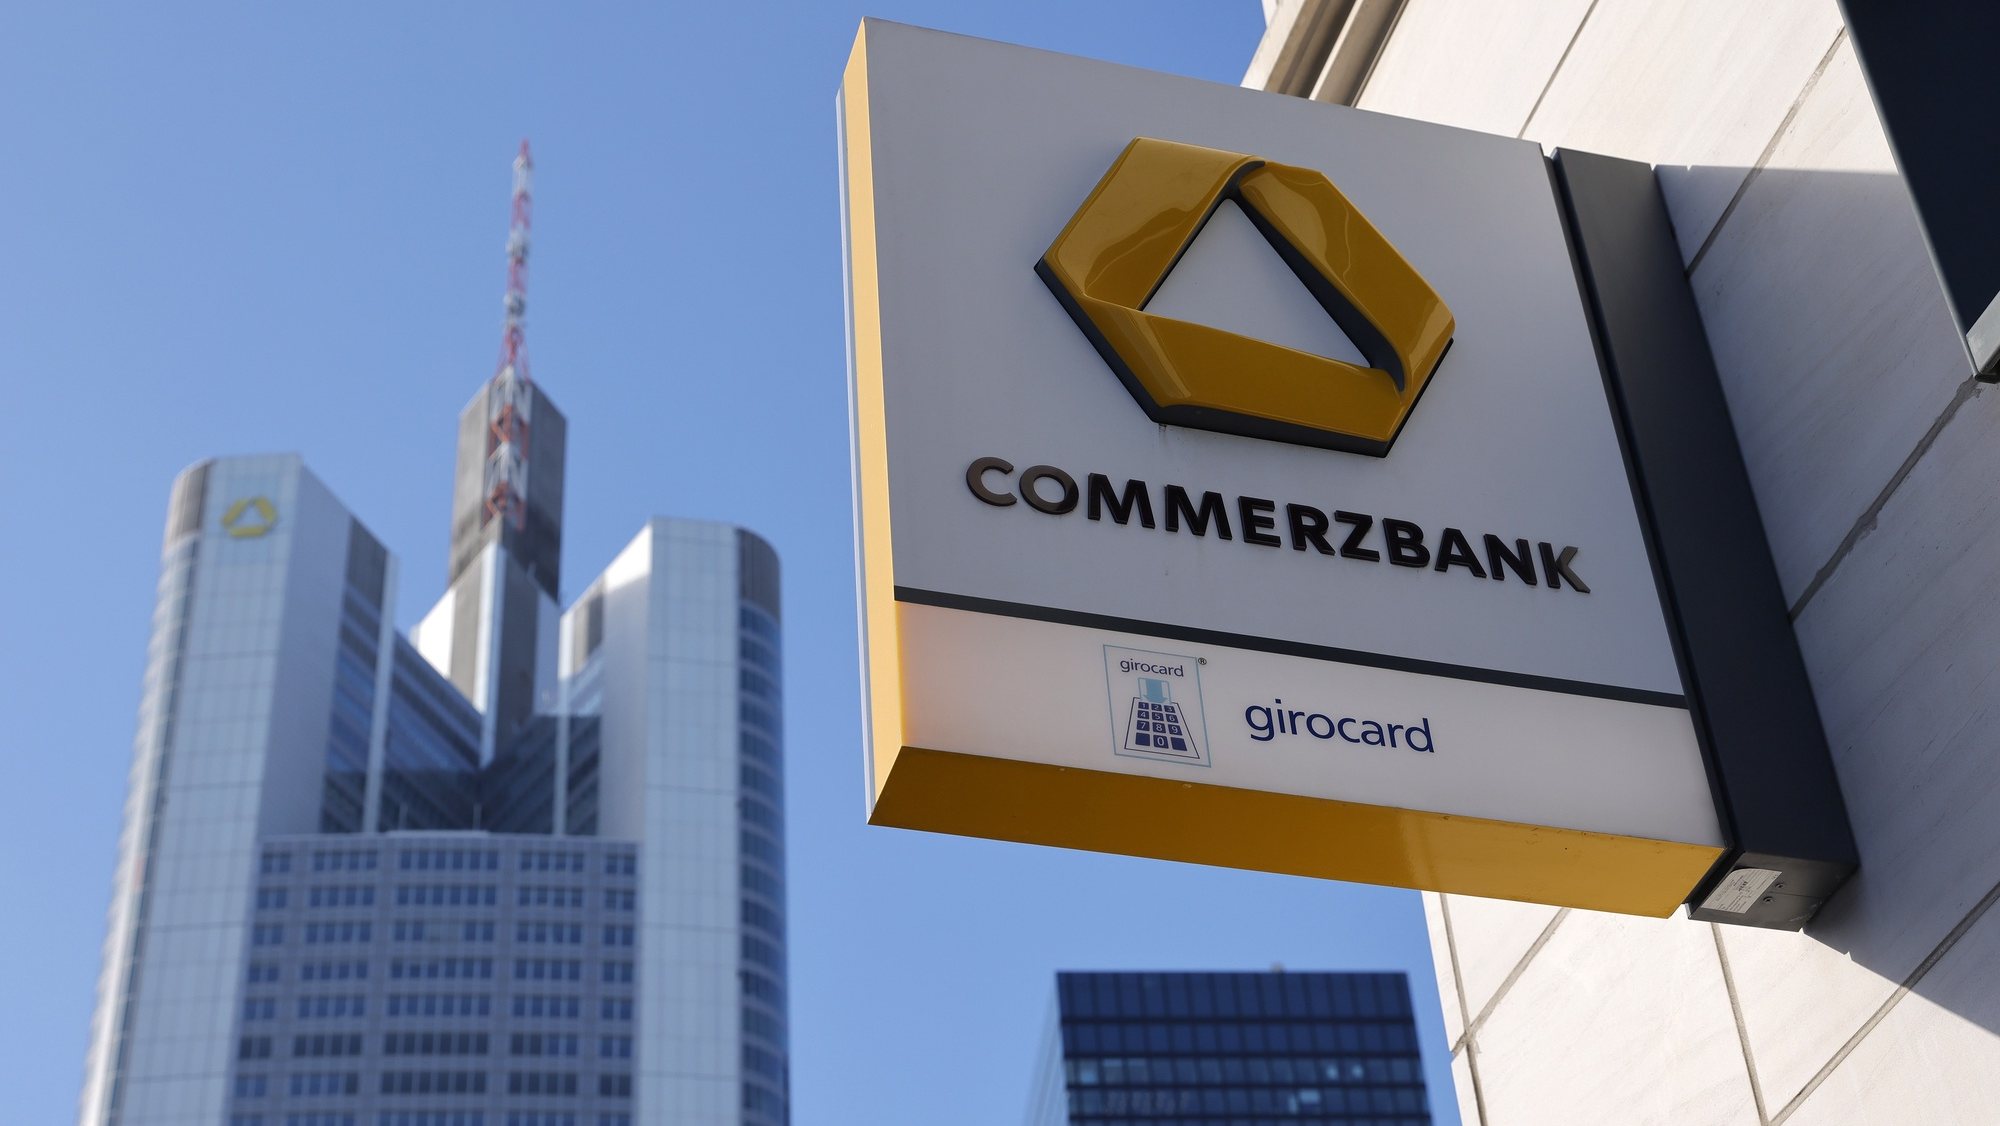 epa08998394 A view on the Commerzbank office tower seen behind a Commerzbank signage at its local branch in Frankfurt am Main, Germany, 09 February 2021. Commerzbank will release their preliminary business figures for the fourth quarter Q4 and the full year 2020 on 11 February 2021.  EPA/RONALD WITTEK